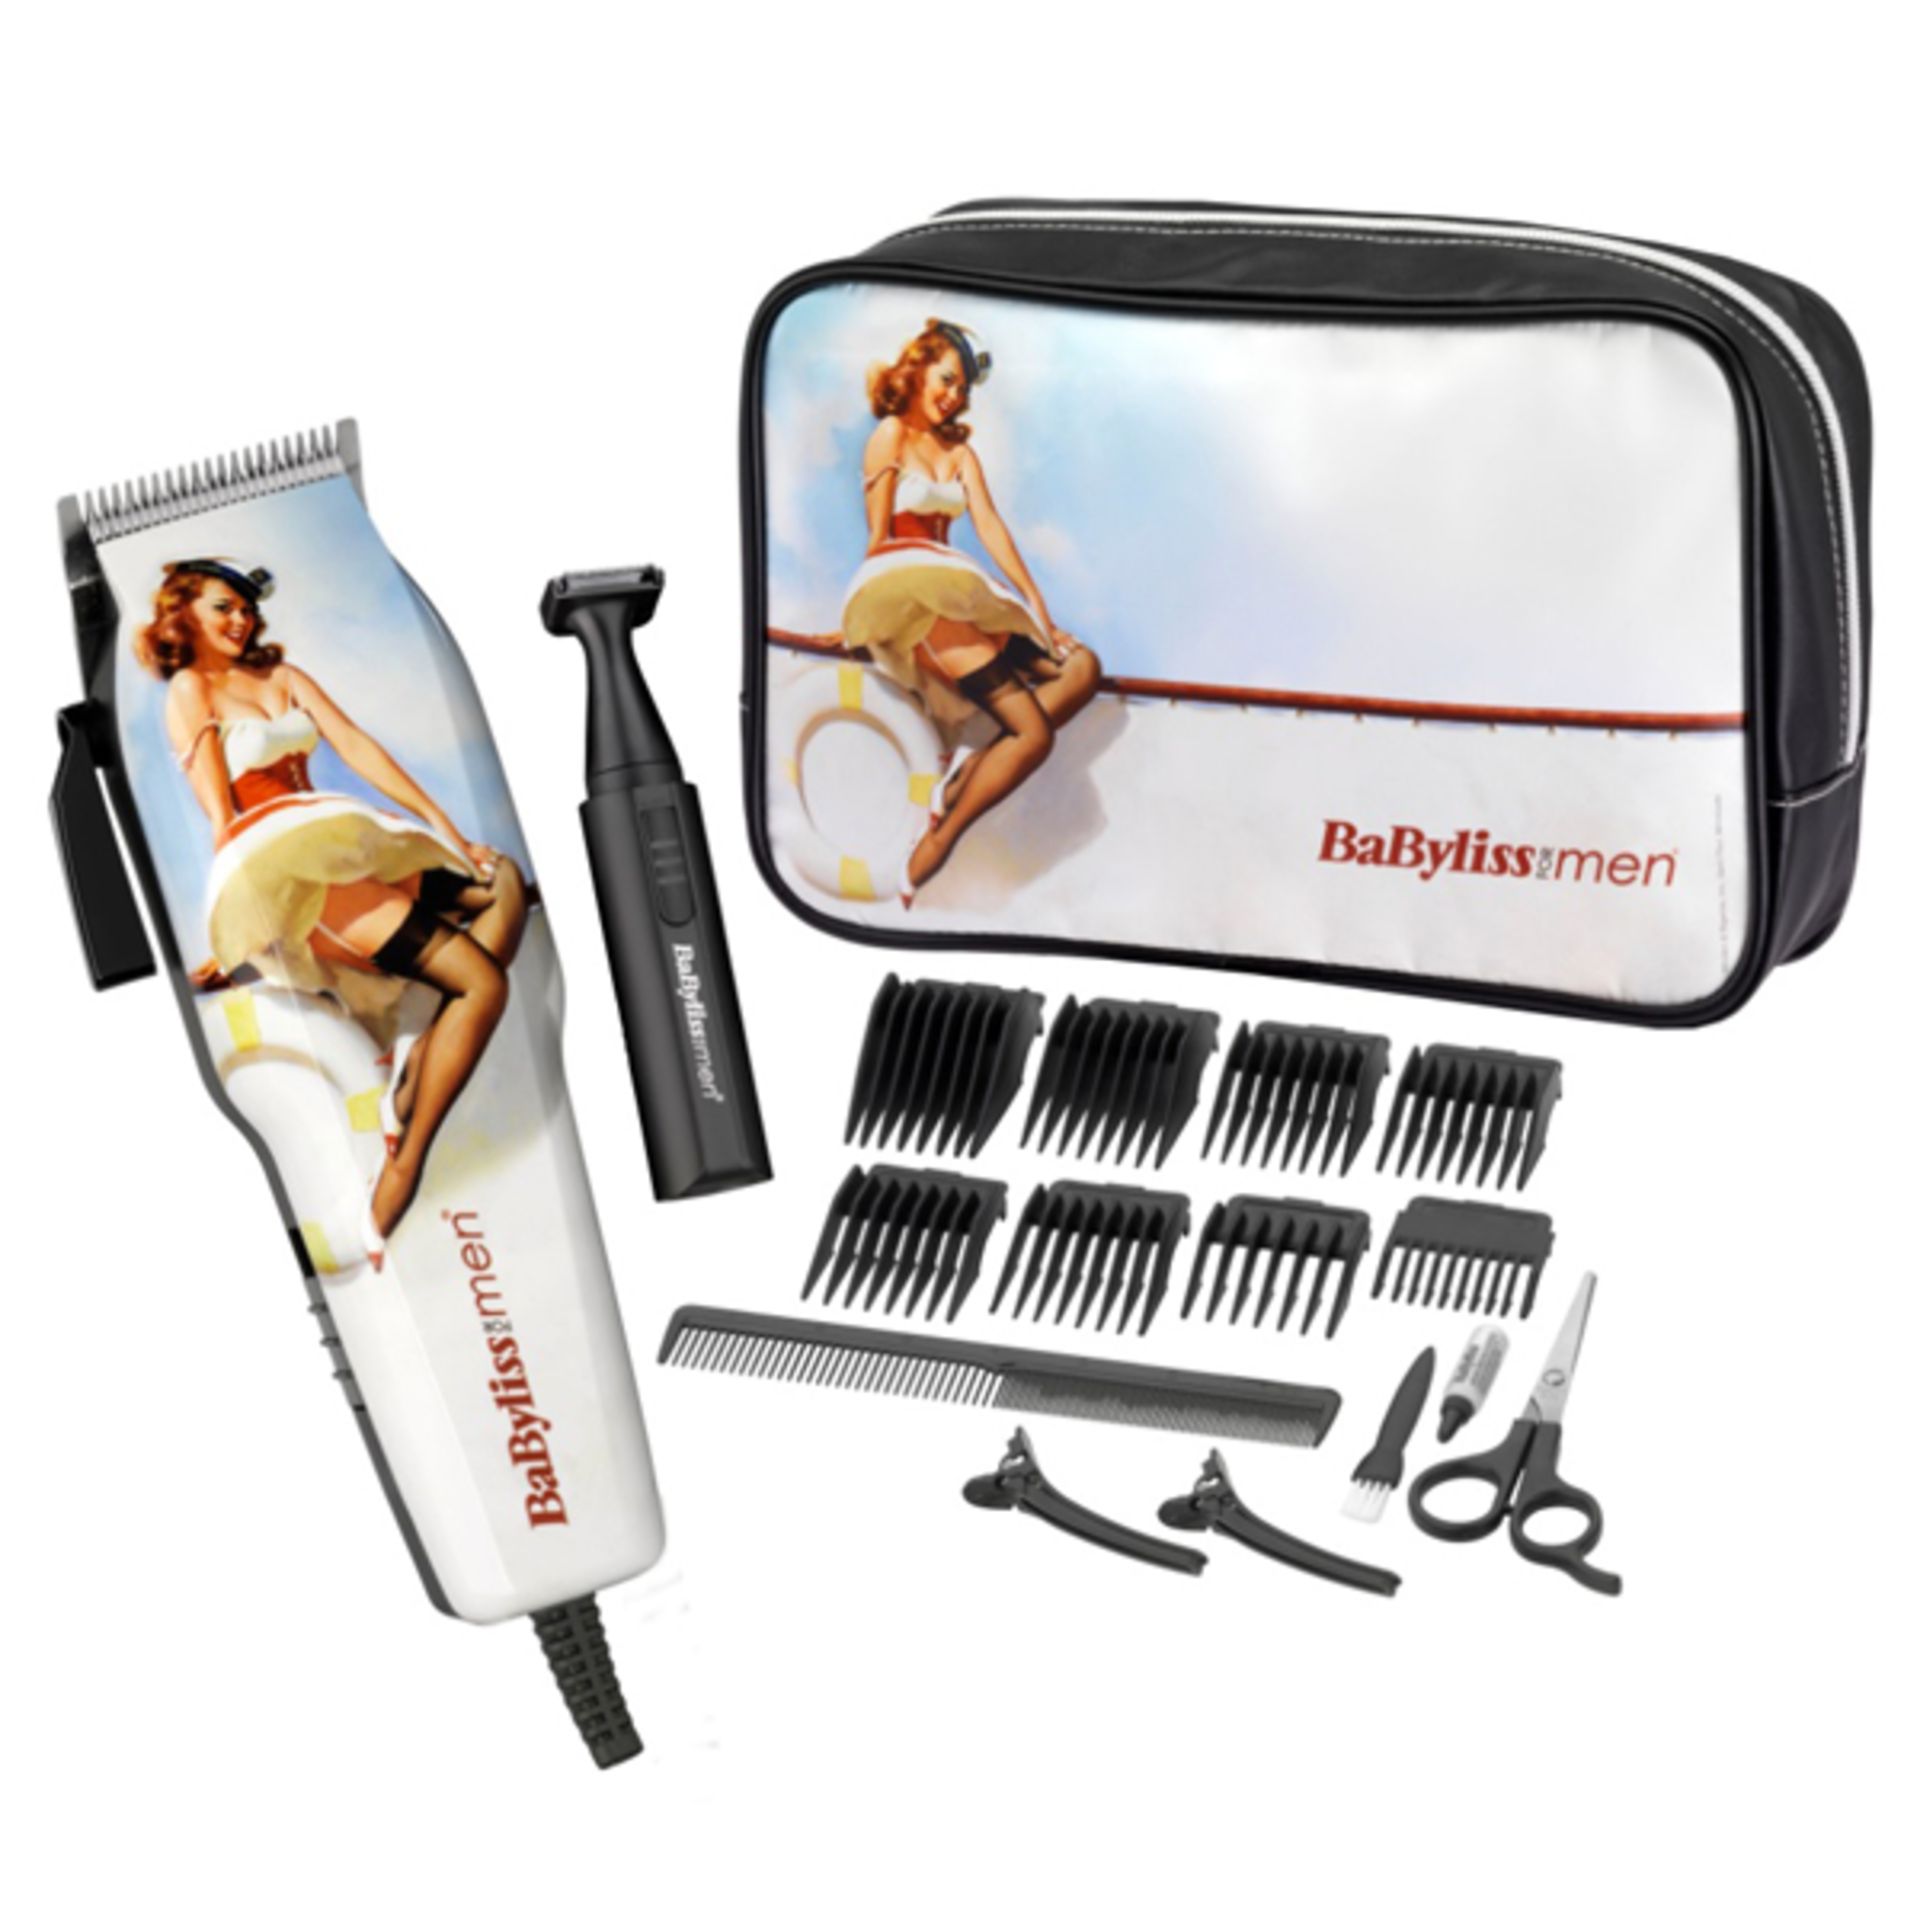 V Brand New Babyliss For Men Special Edition Pin-Ups Clipper Kit with Professional Grade Mains